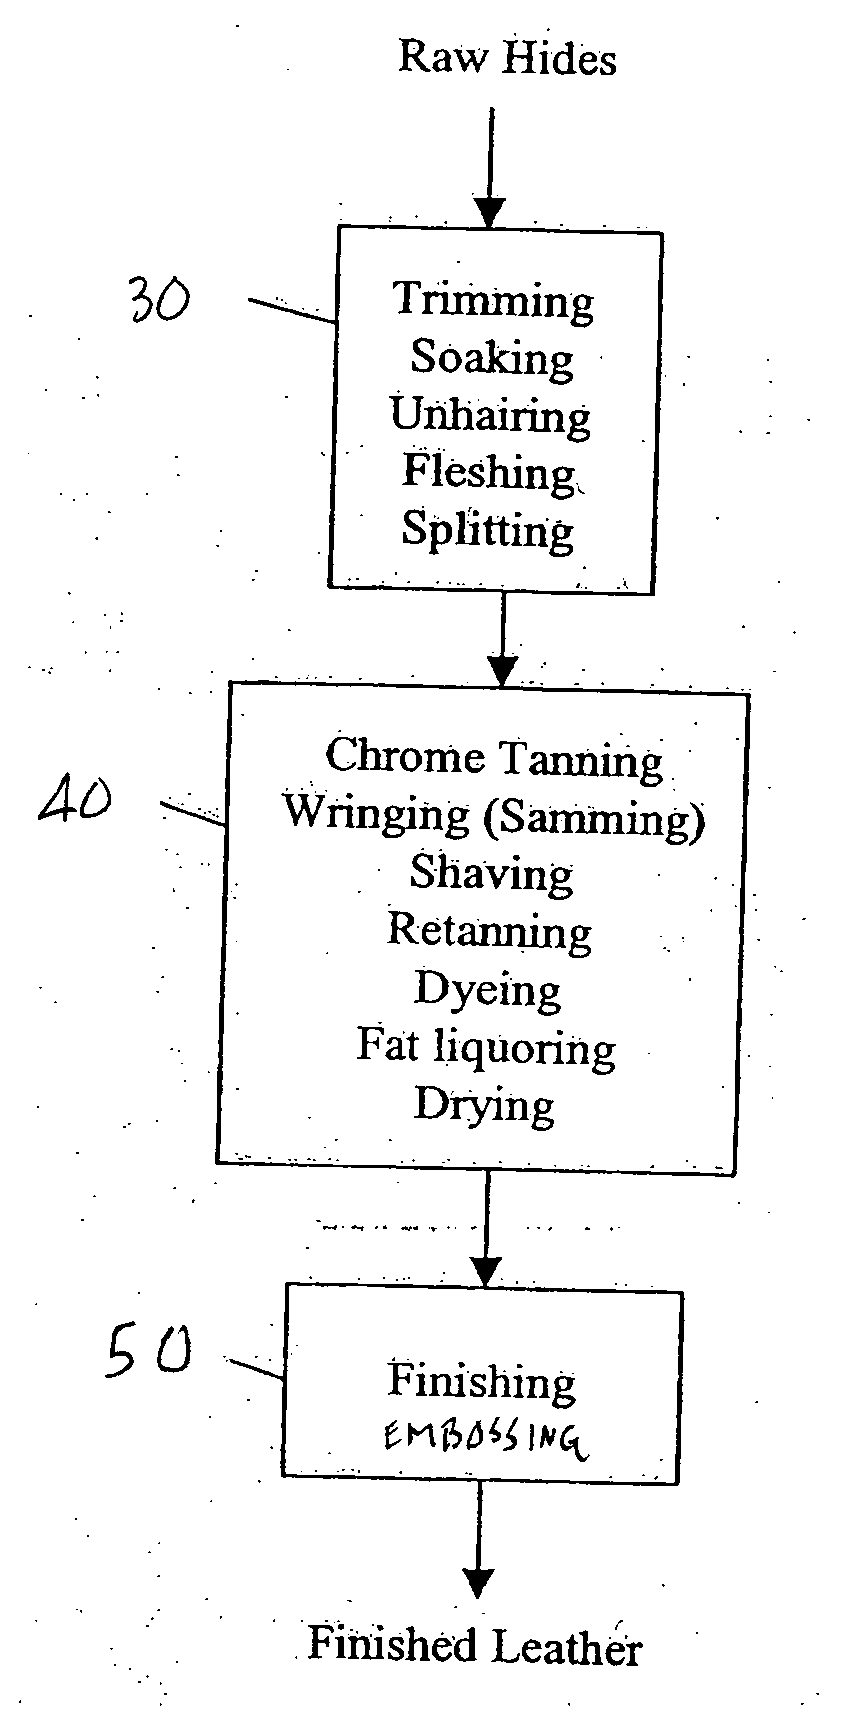 Apparatus and felt for embossing leather and artificial leather type textiles using high tension